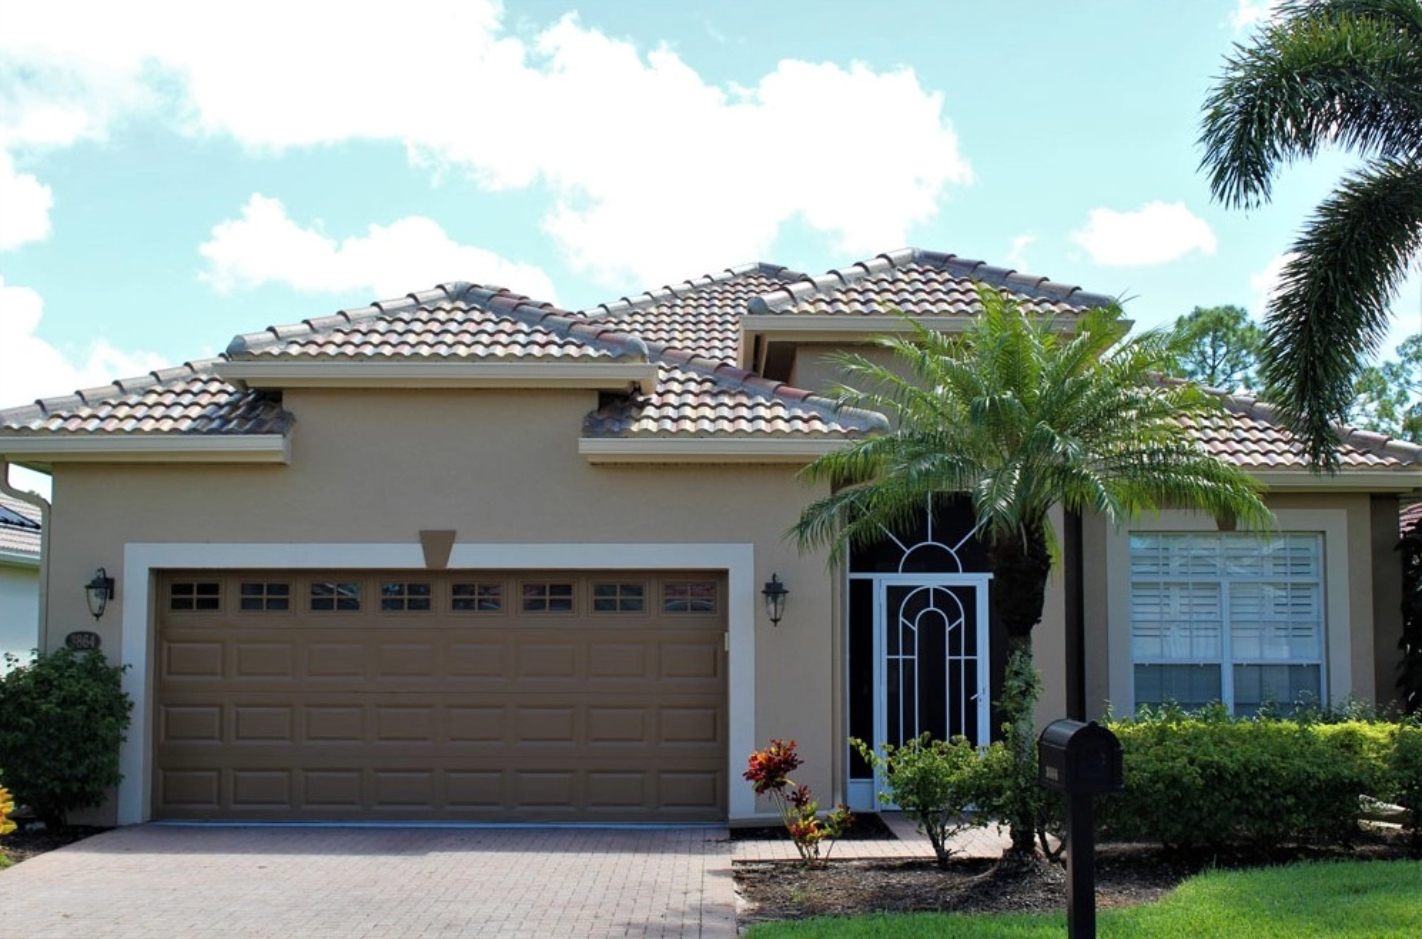 Multi level tiled roof in Southeast Florida